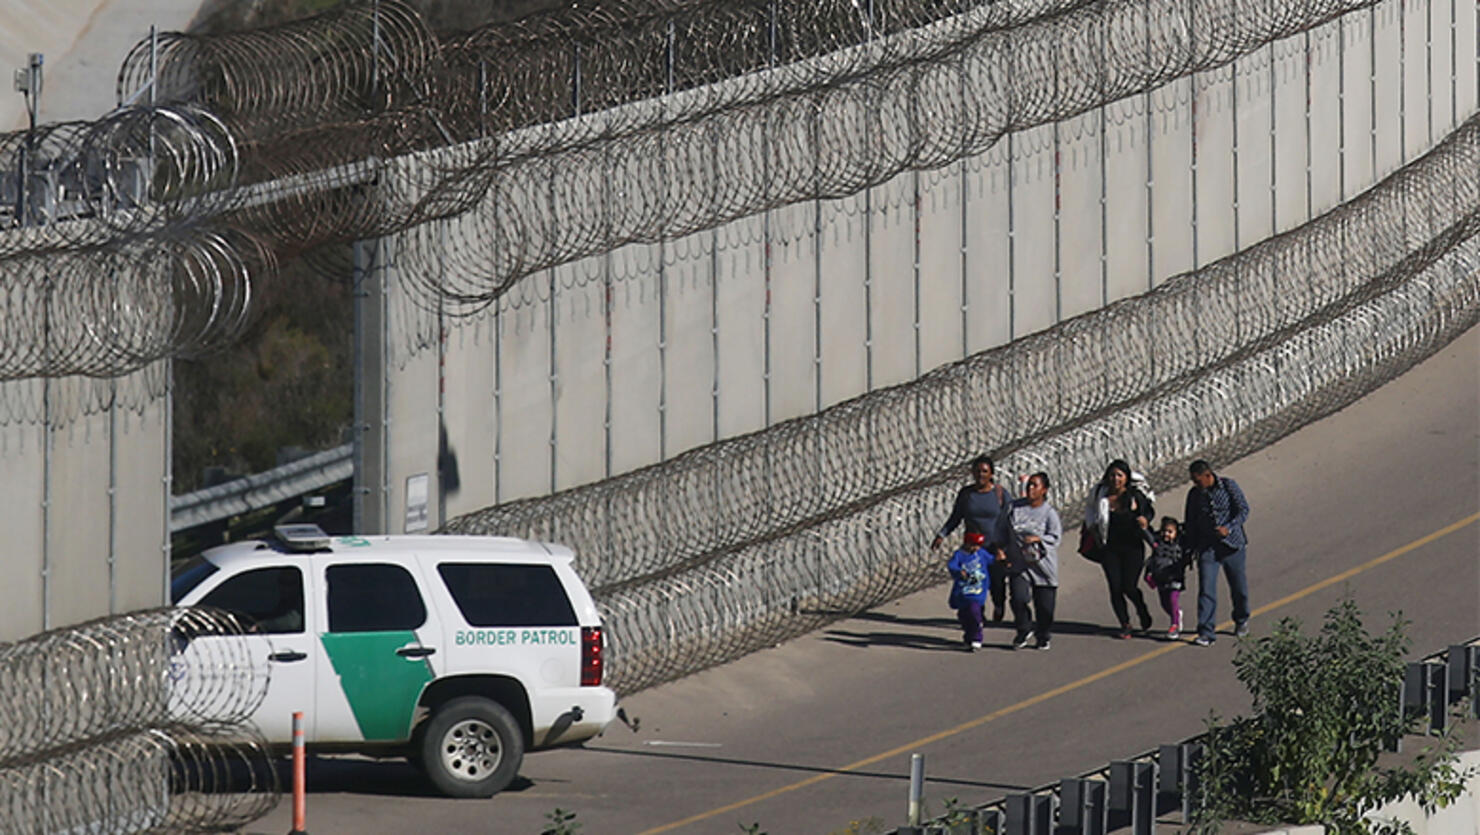 Migrants walk while being taken into custody by the U.S. Border Patrol after crossing the U.S.-Mexico border fence and turning themselves in